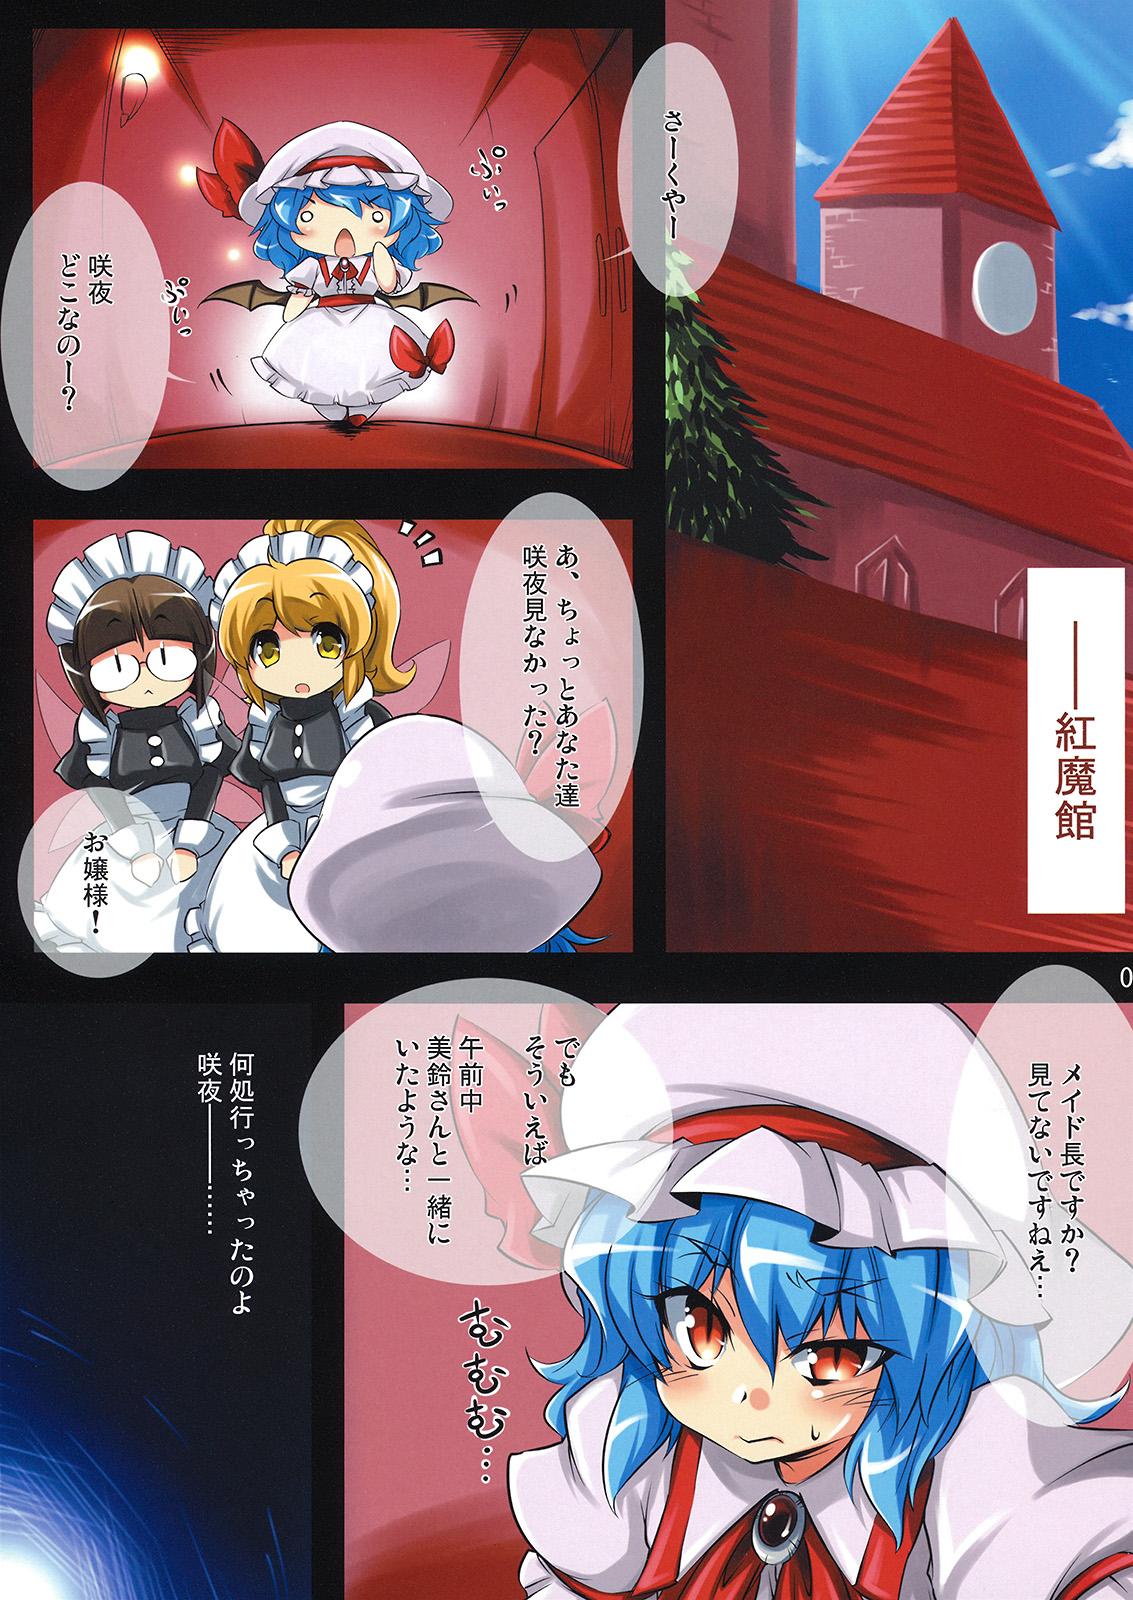 Culito S&M Revenge + omake hon - Touhou project Gay Oralsex - Page 3